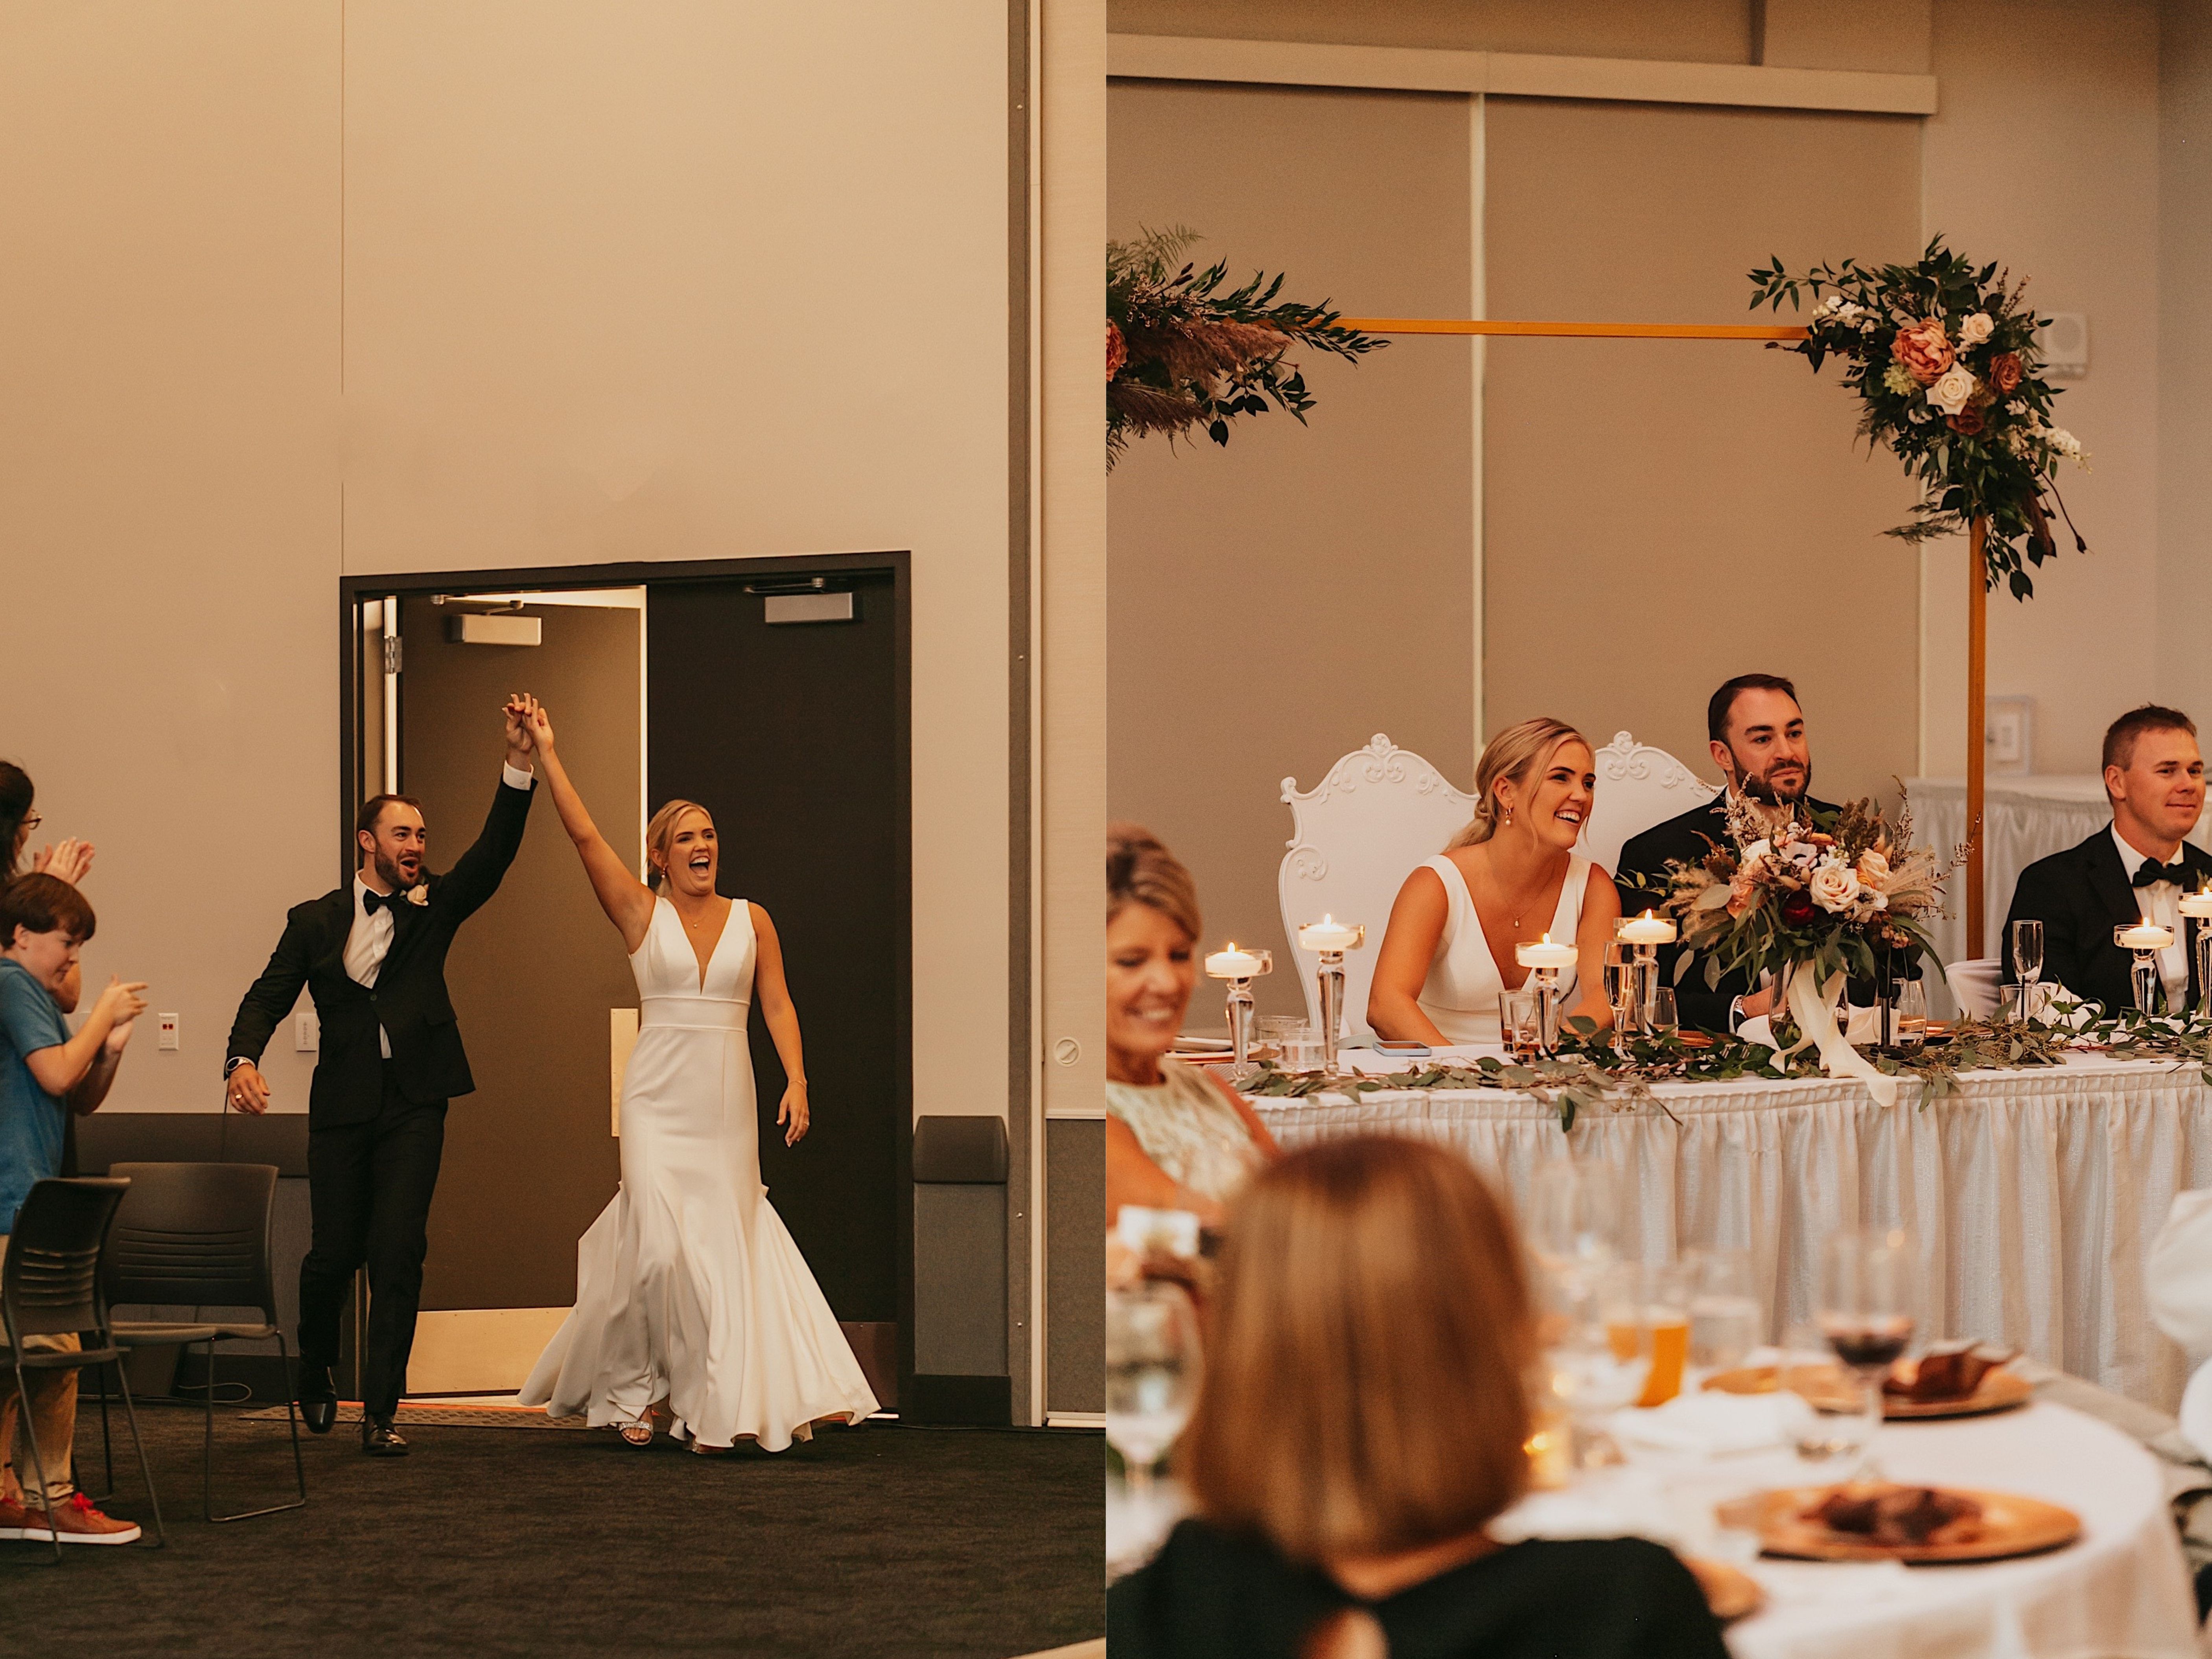 2 side by side photos, the left is of a bride and groom entering their wedding reception and cheering, the right if of them seated at their table listening to a speech